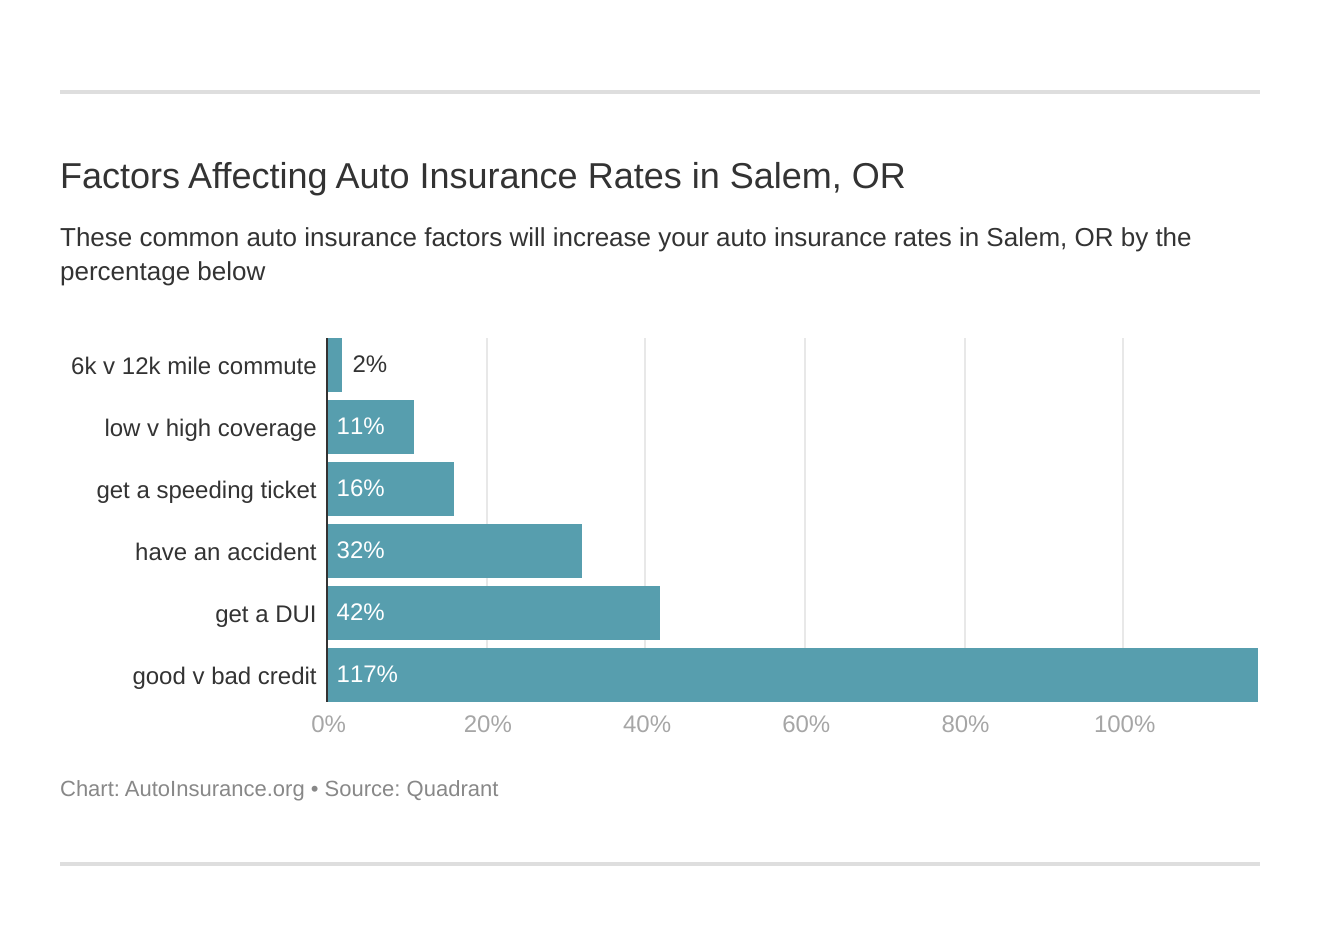 Factors Affecting Auto Insurance Rates in Salem, OR